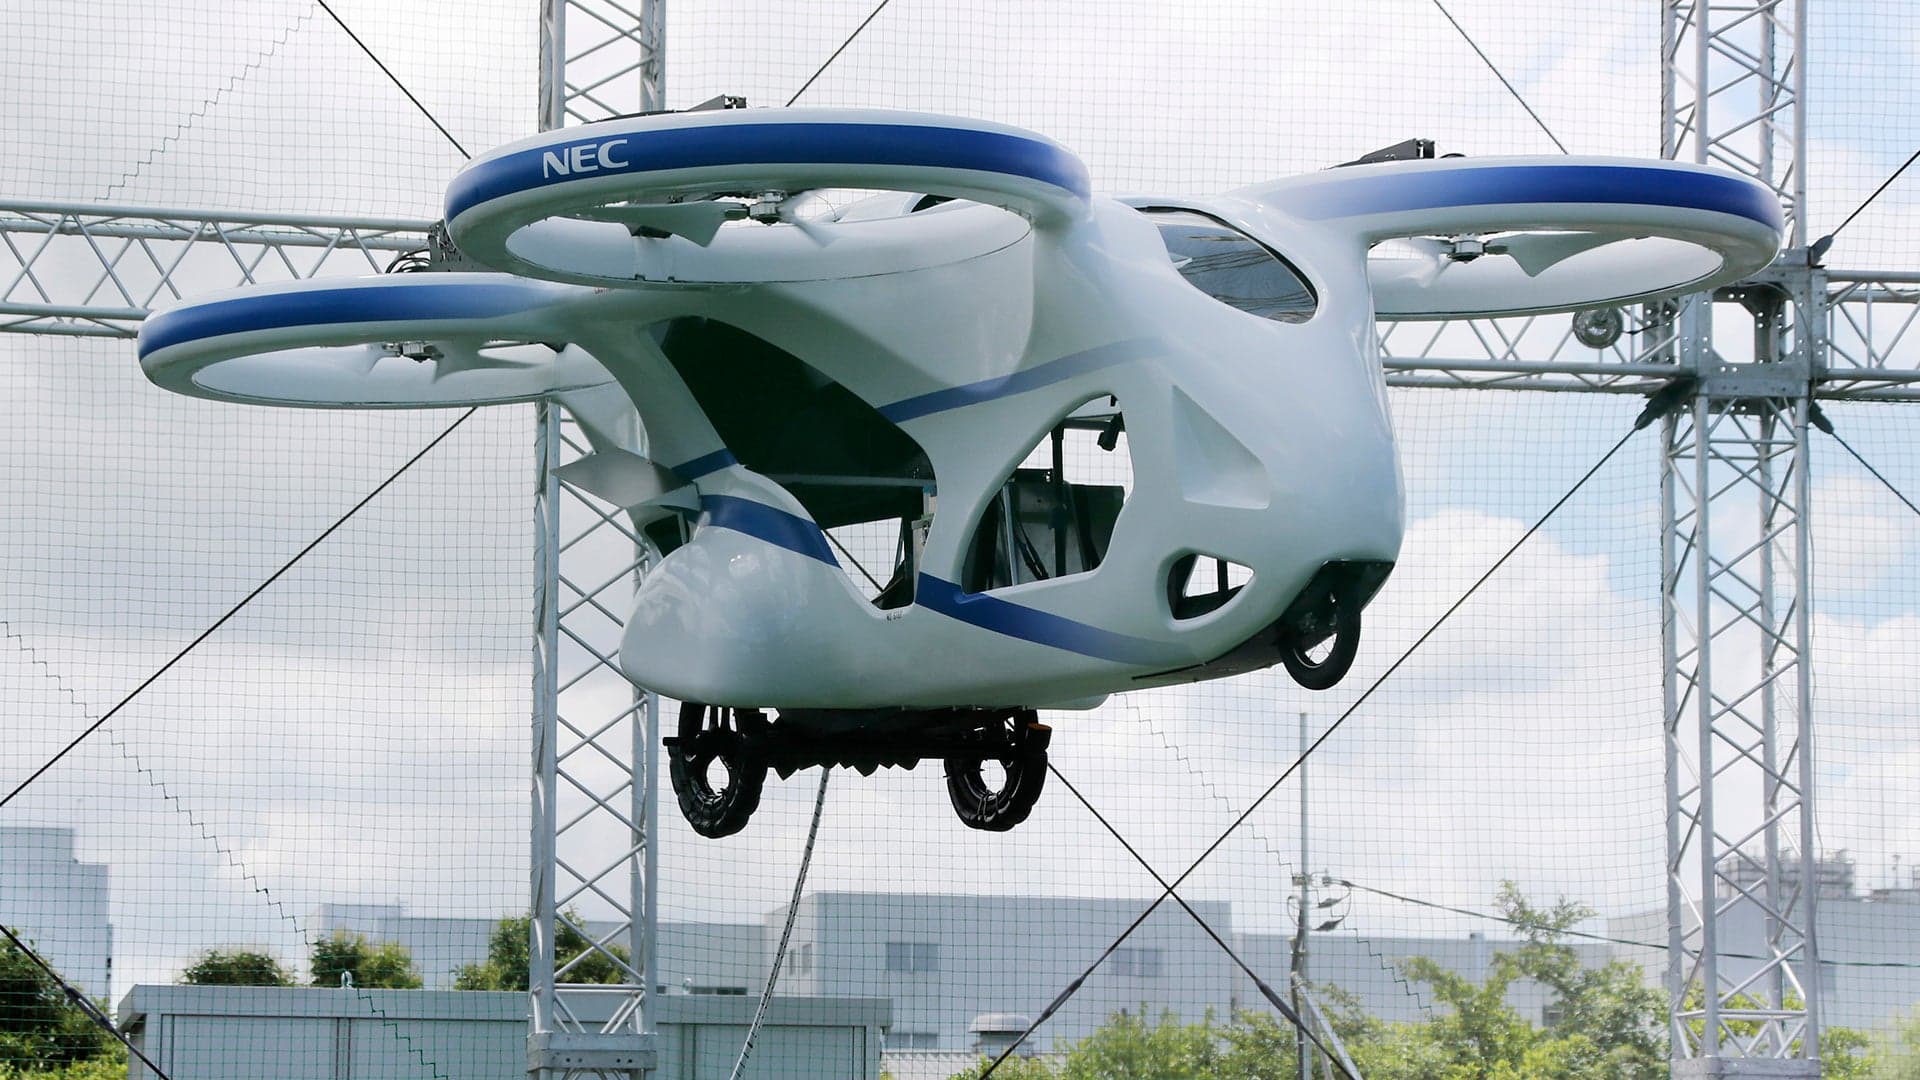 The BBC Declares Flying Cars Are Here, and It Sure Is Wrong About That